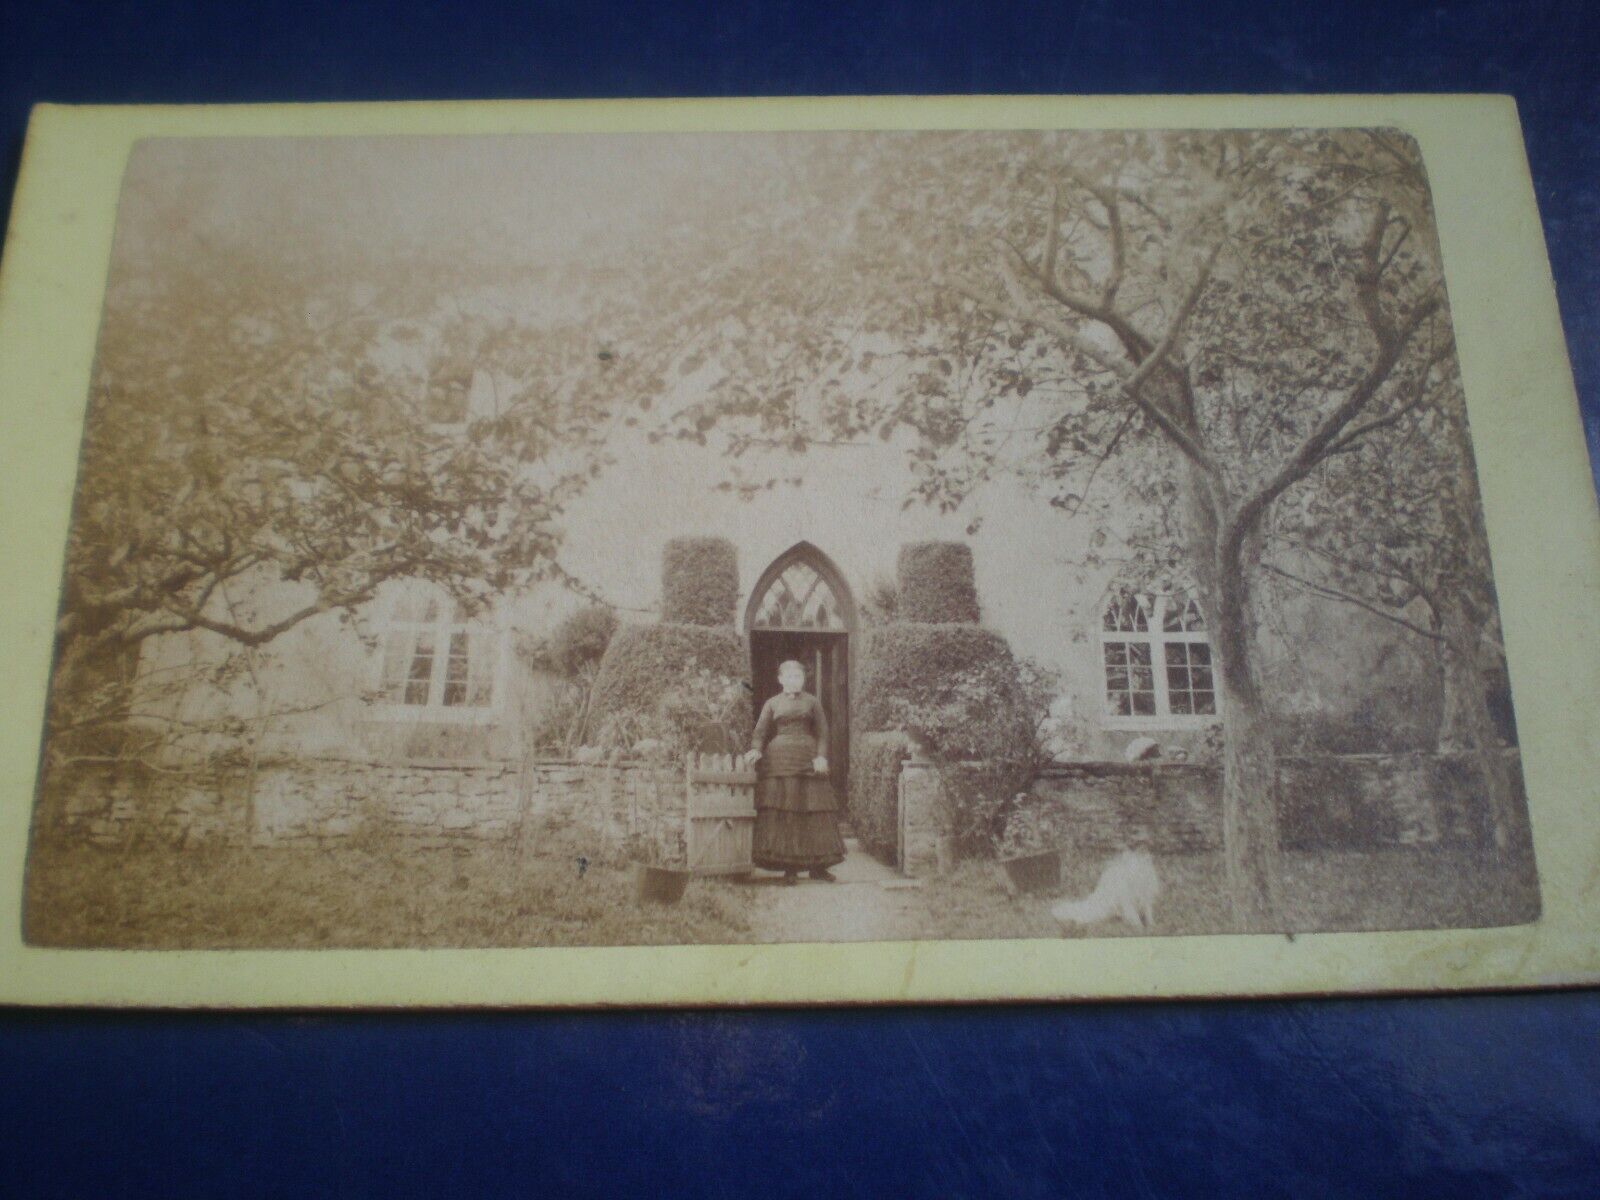 Cdv old photograph woman outside house Weston In Gordano Somerset c1880s